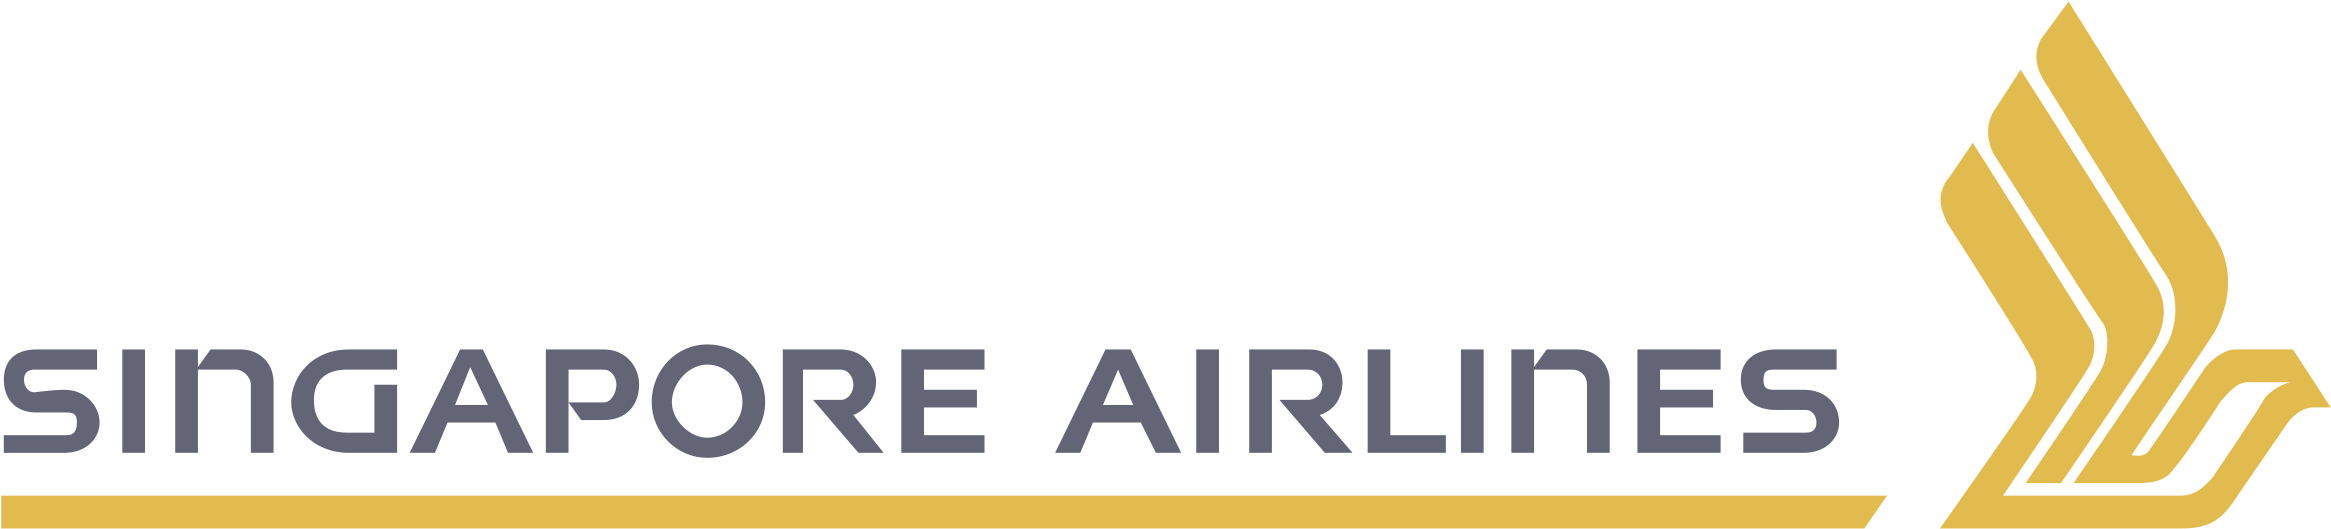 Singapore Airlines Logo Png Transparent - Singapore Airlines Small Logo (2400x2400), Png Download